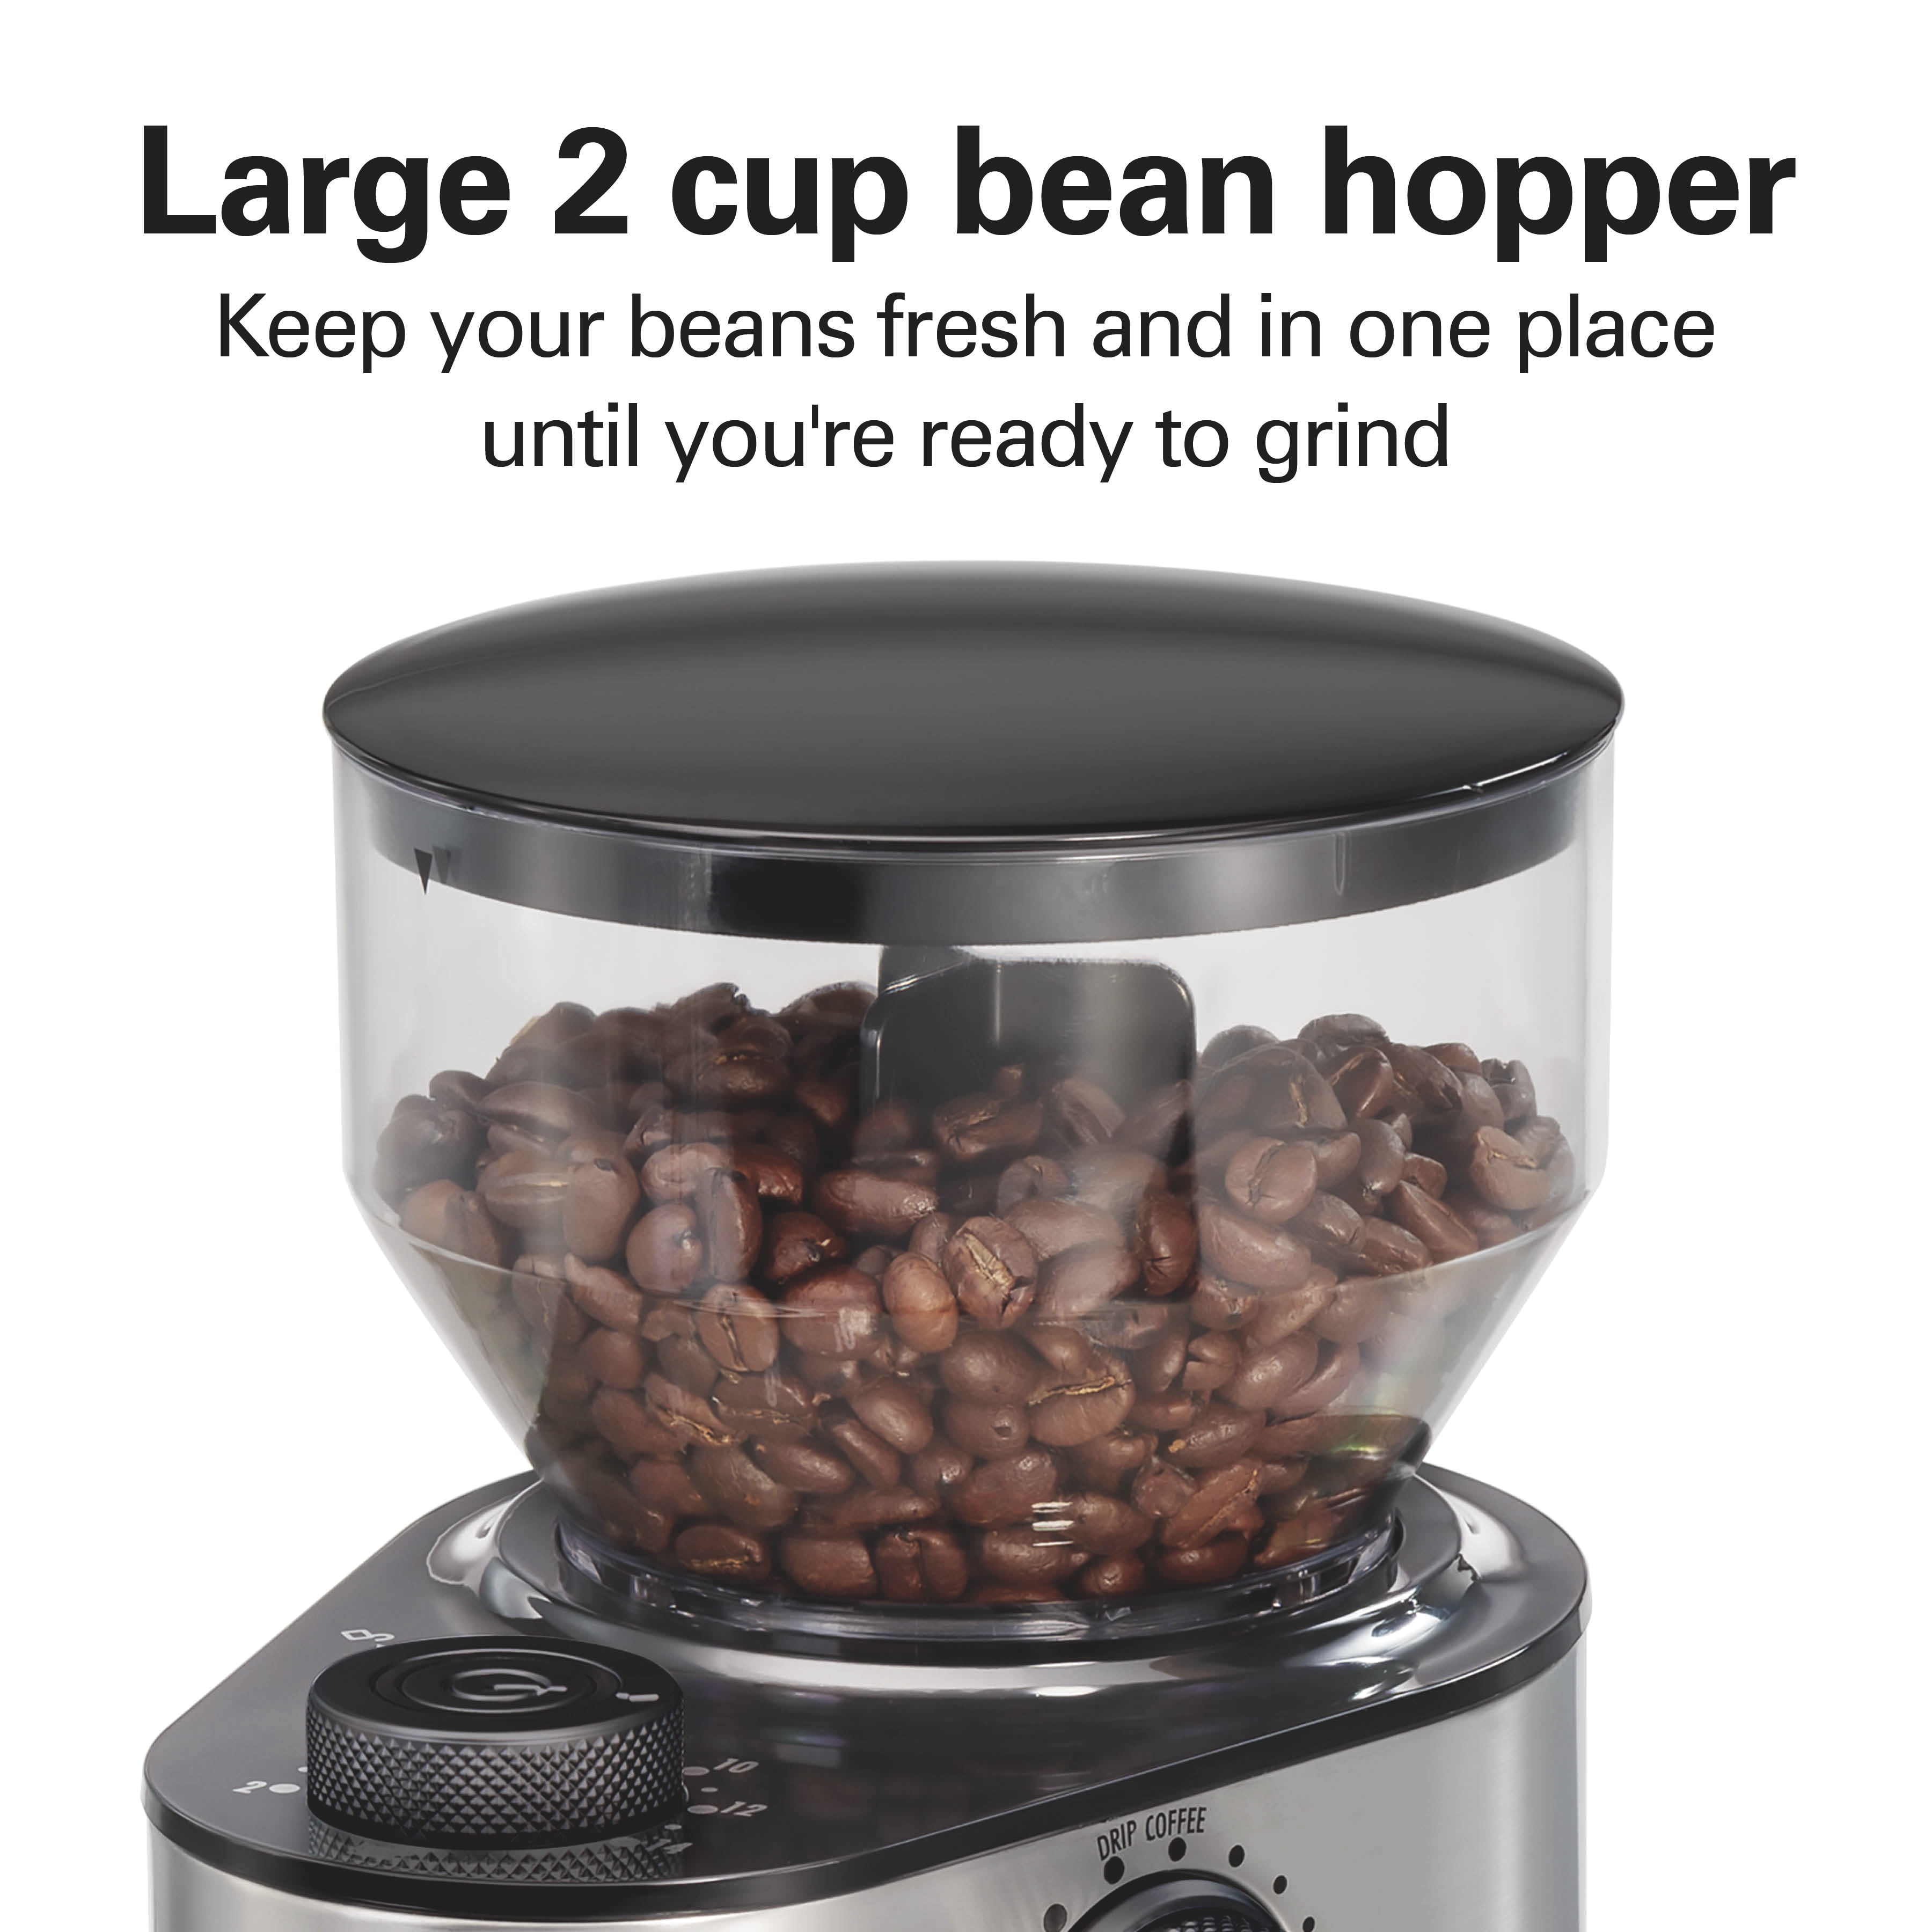  Hamilton Beach Electric Coffee Grinder for Beans, Spices and  More, with Multiple Grind Settings for up to 14 Cups, Removable Stainless  Steel Chamber, Grey (80396C), 10 oz: Home & Kitchen